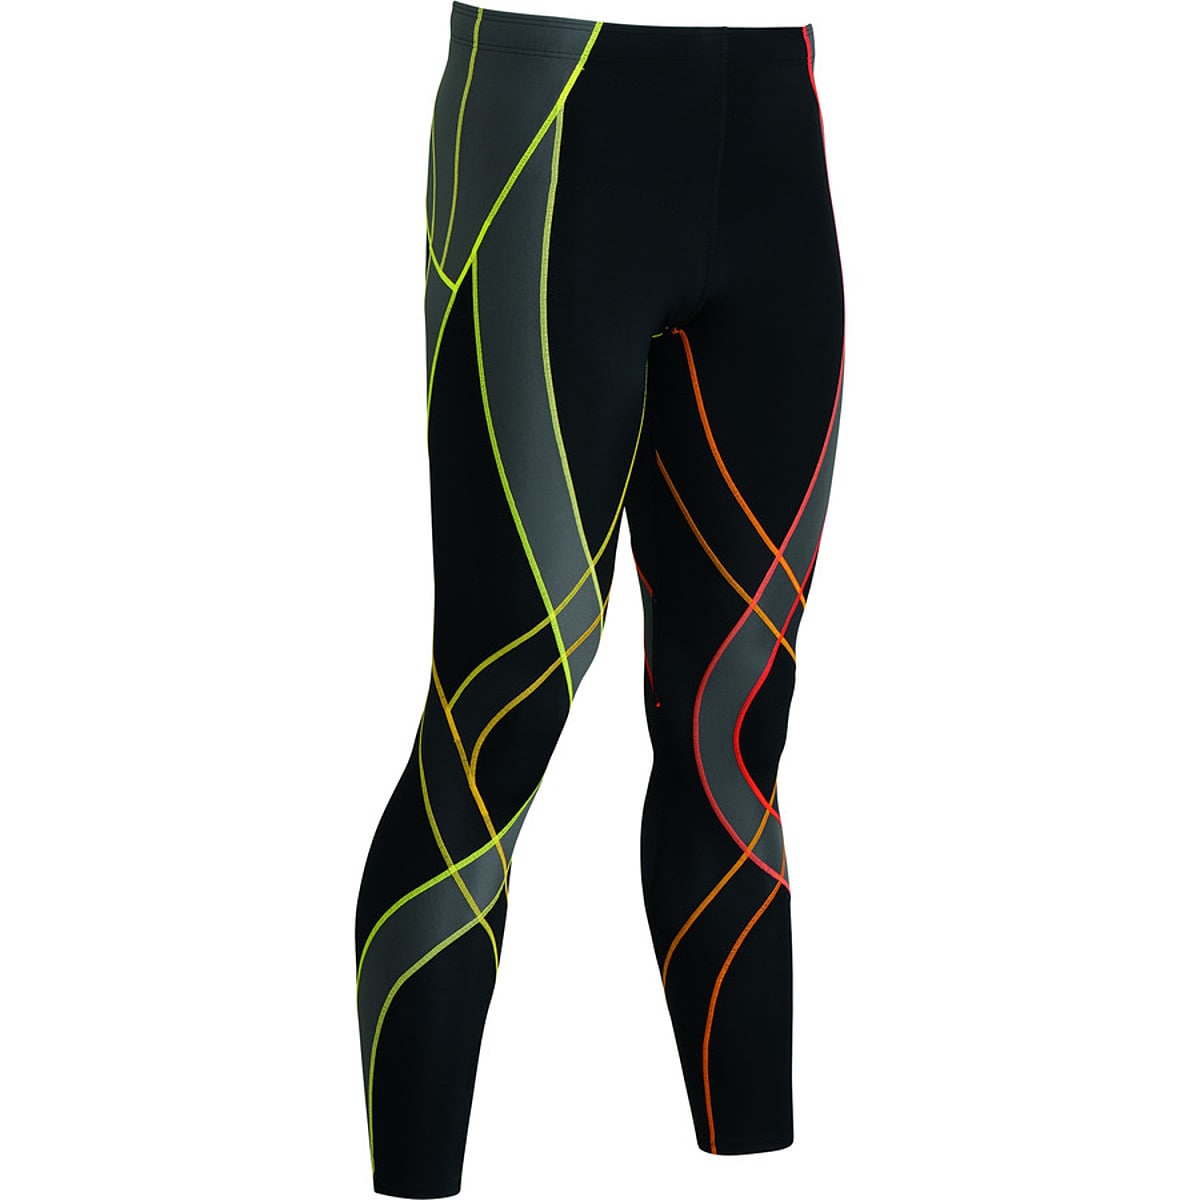 CW-X Business Athletic Leggings for Women